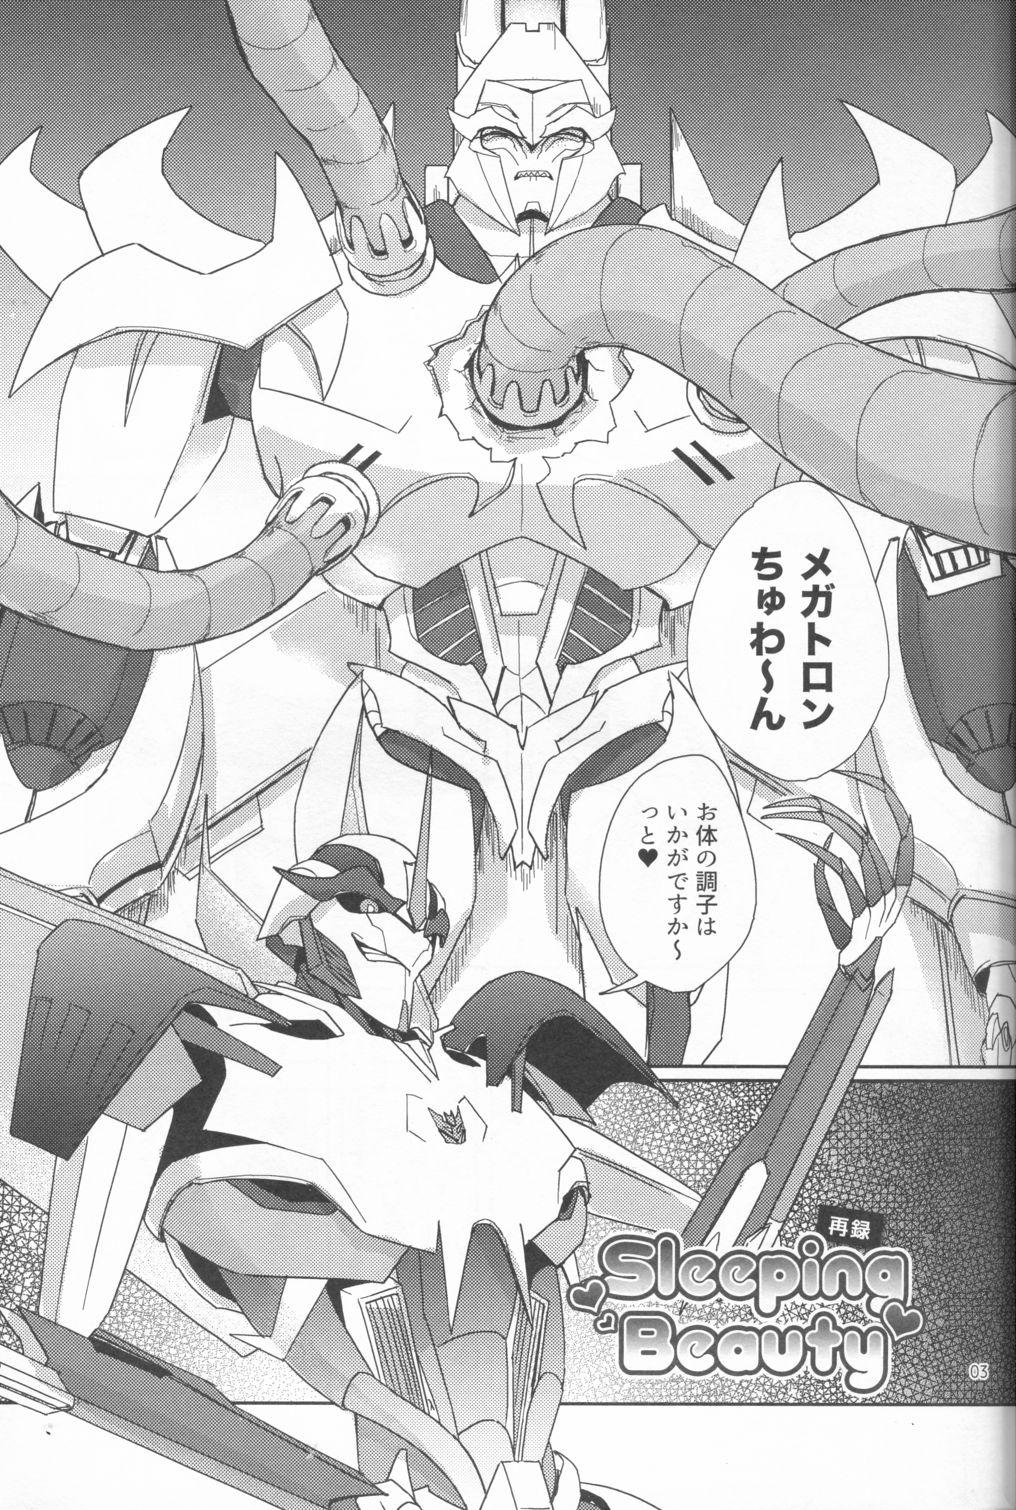 Bed Sleeping Danger - Transformers White - Page 2